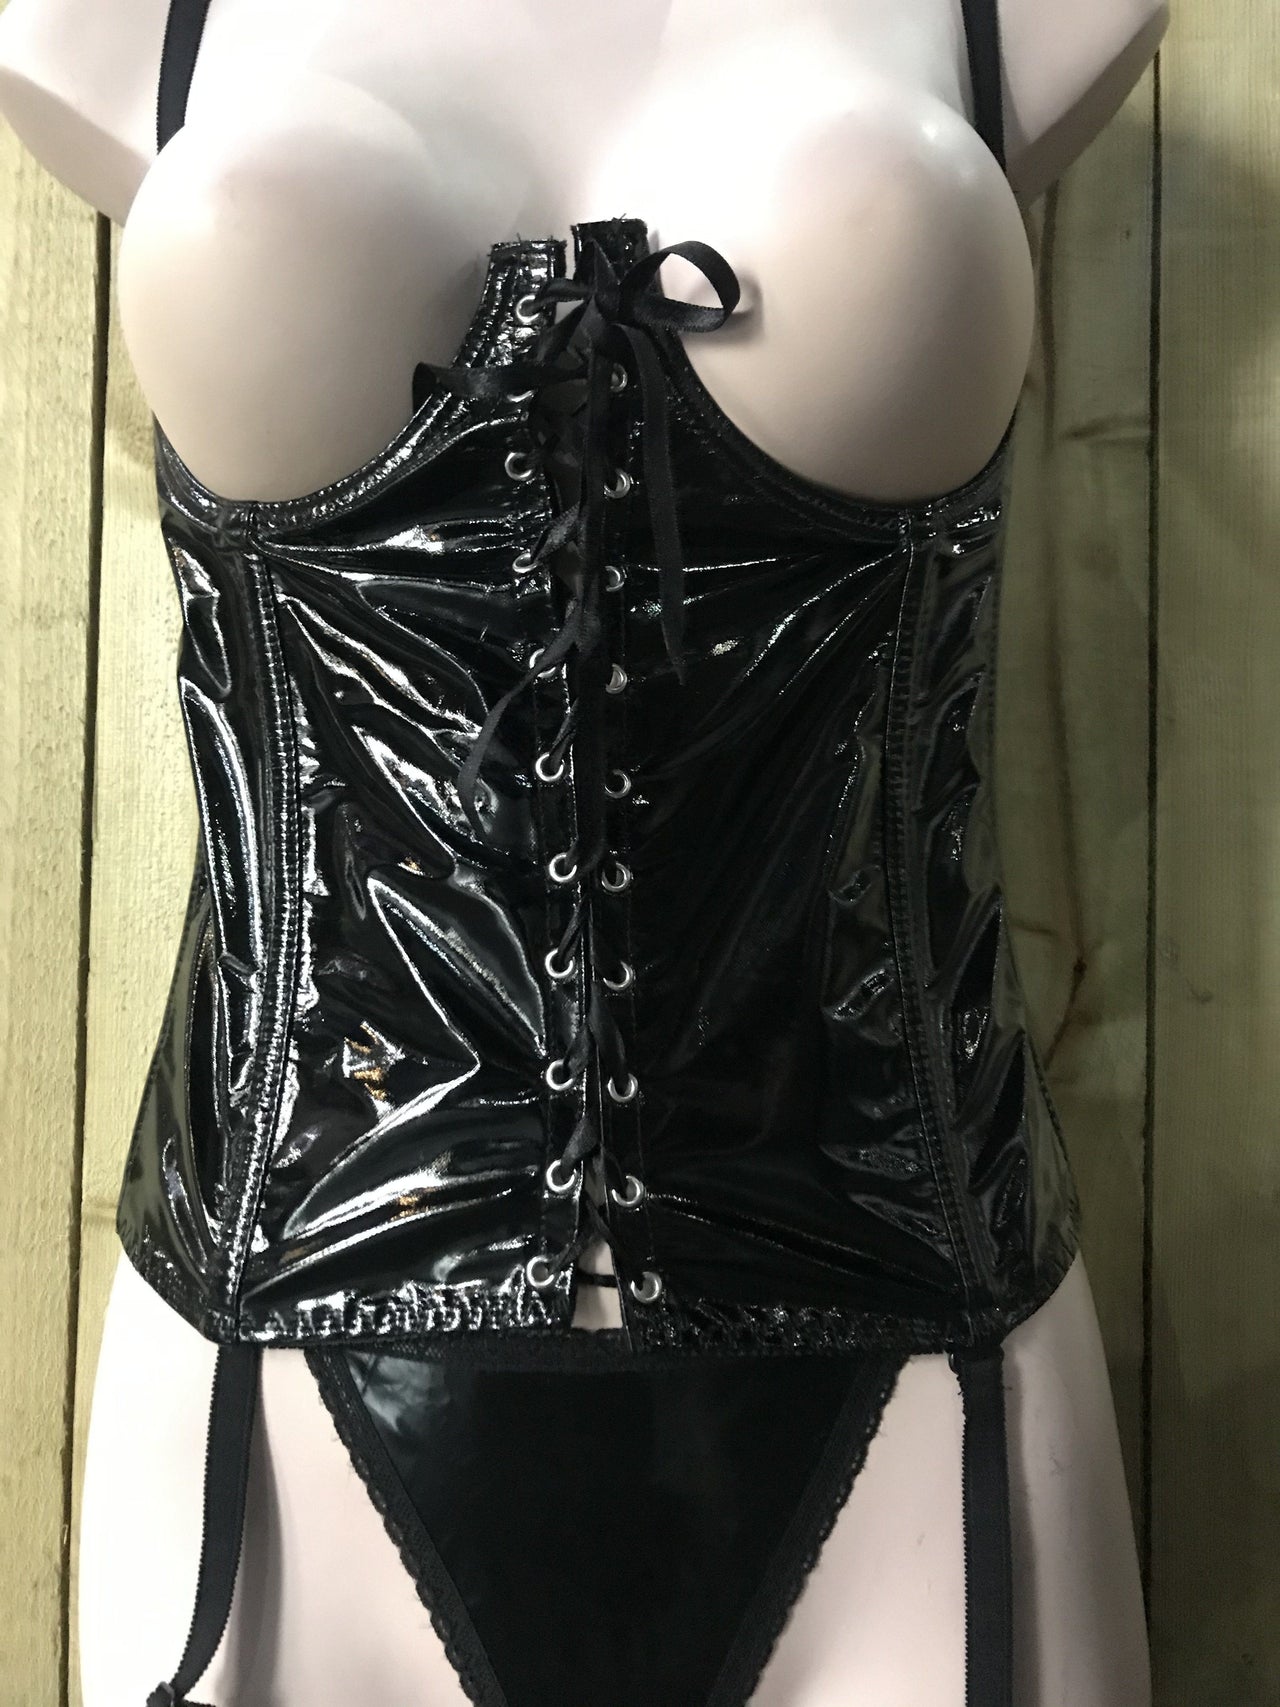 PVC Wetlook Open Cup Basque by Classified